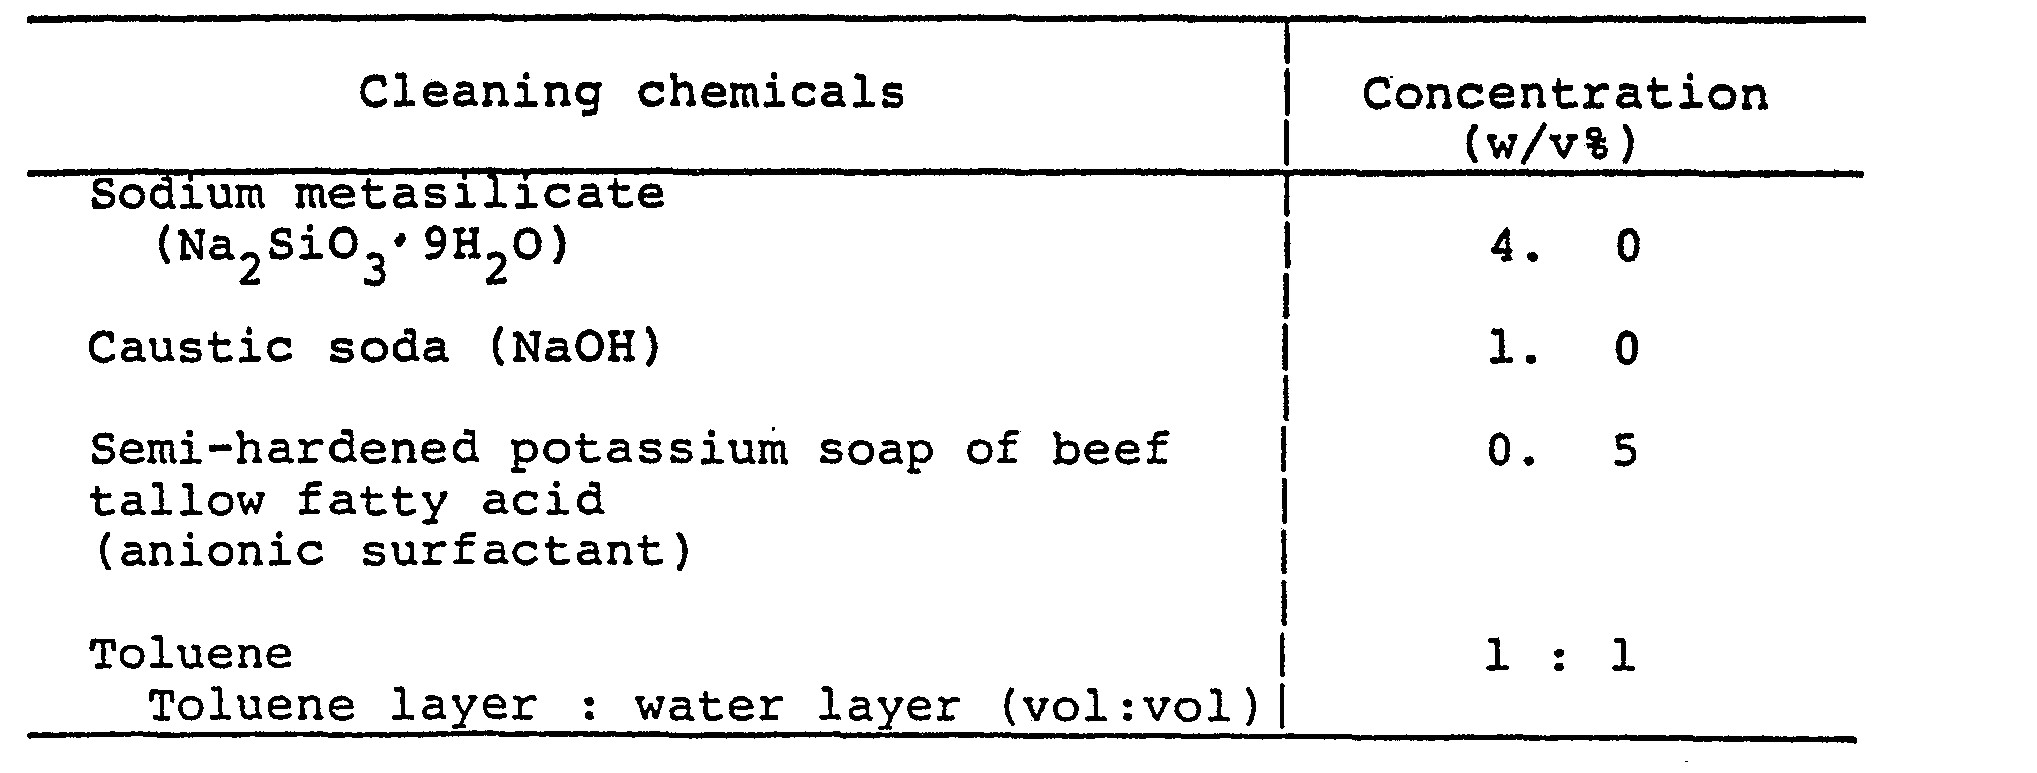 chemical cleaning was applied with the cleaning chemicals in the following table figure imgb0010